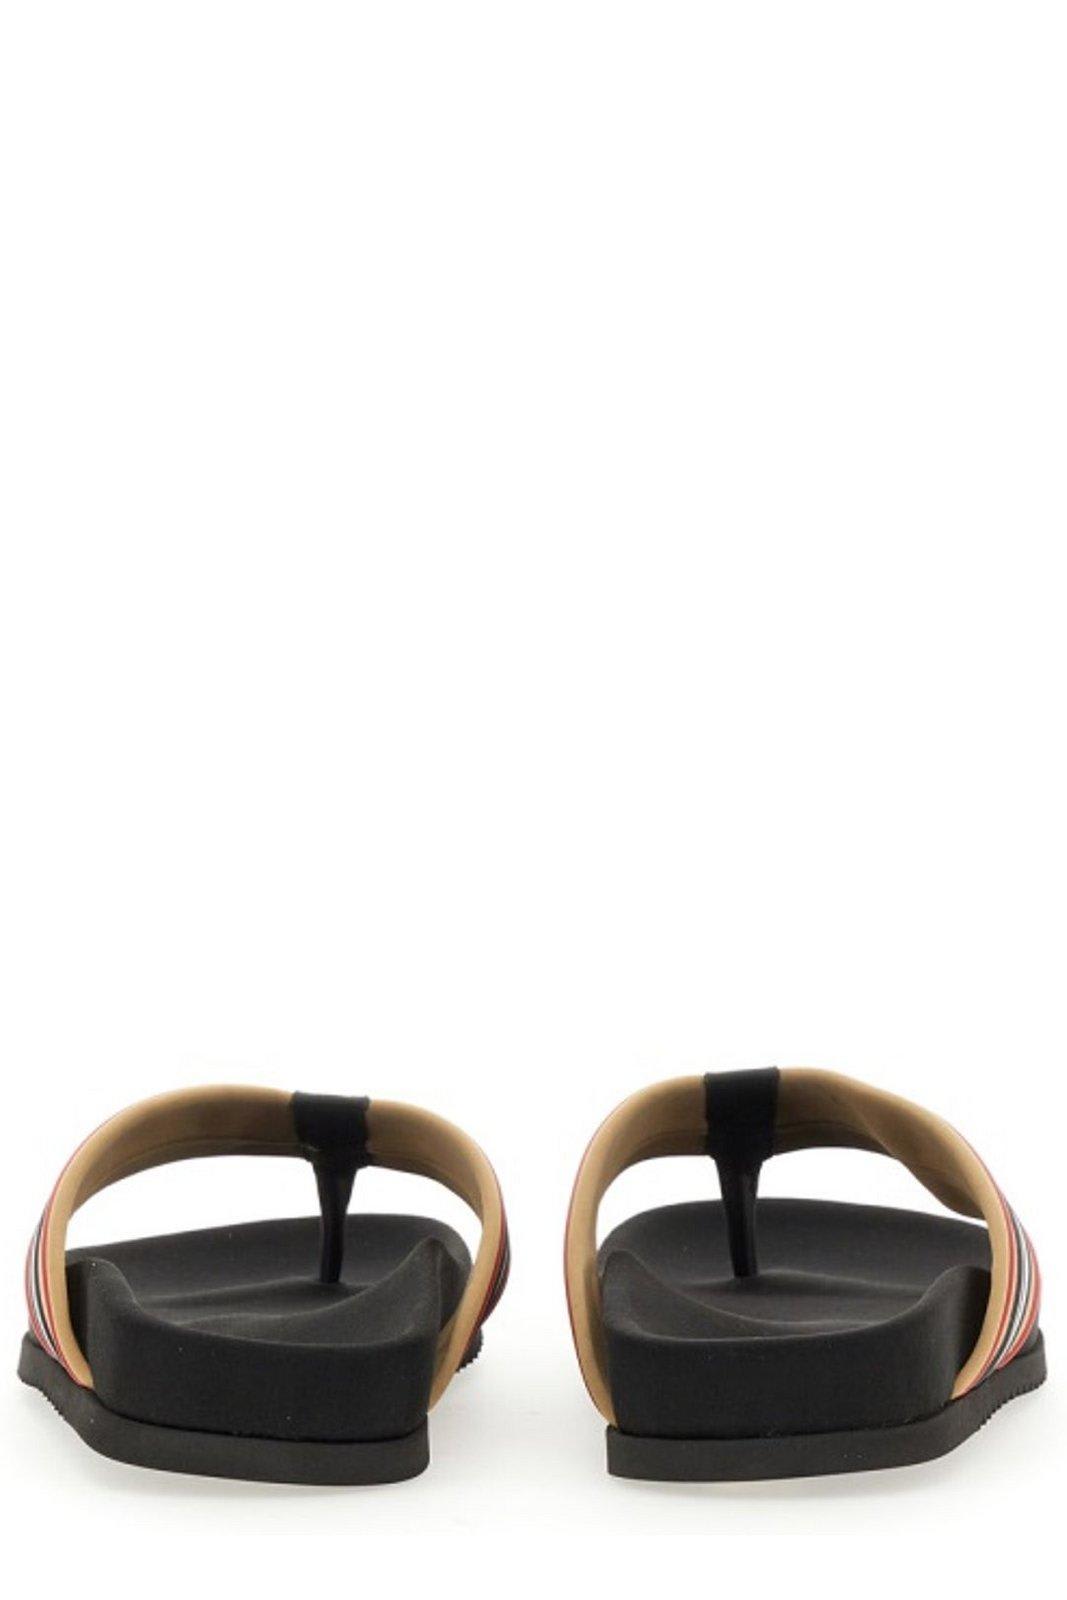 Shop Burberry Slip-on Thong Sandals In Multicolour